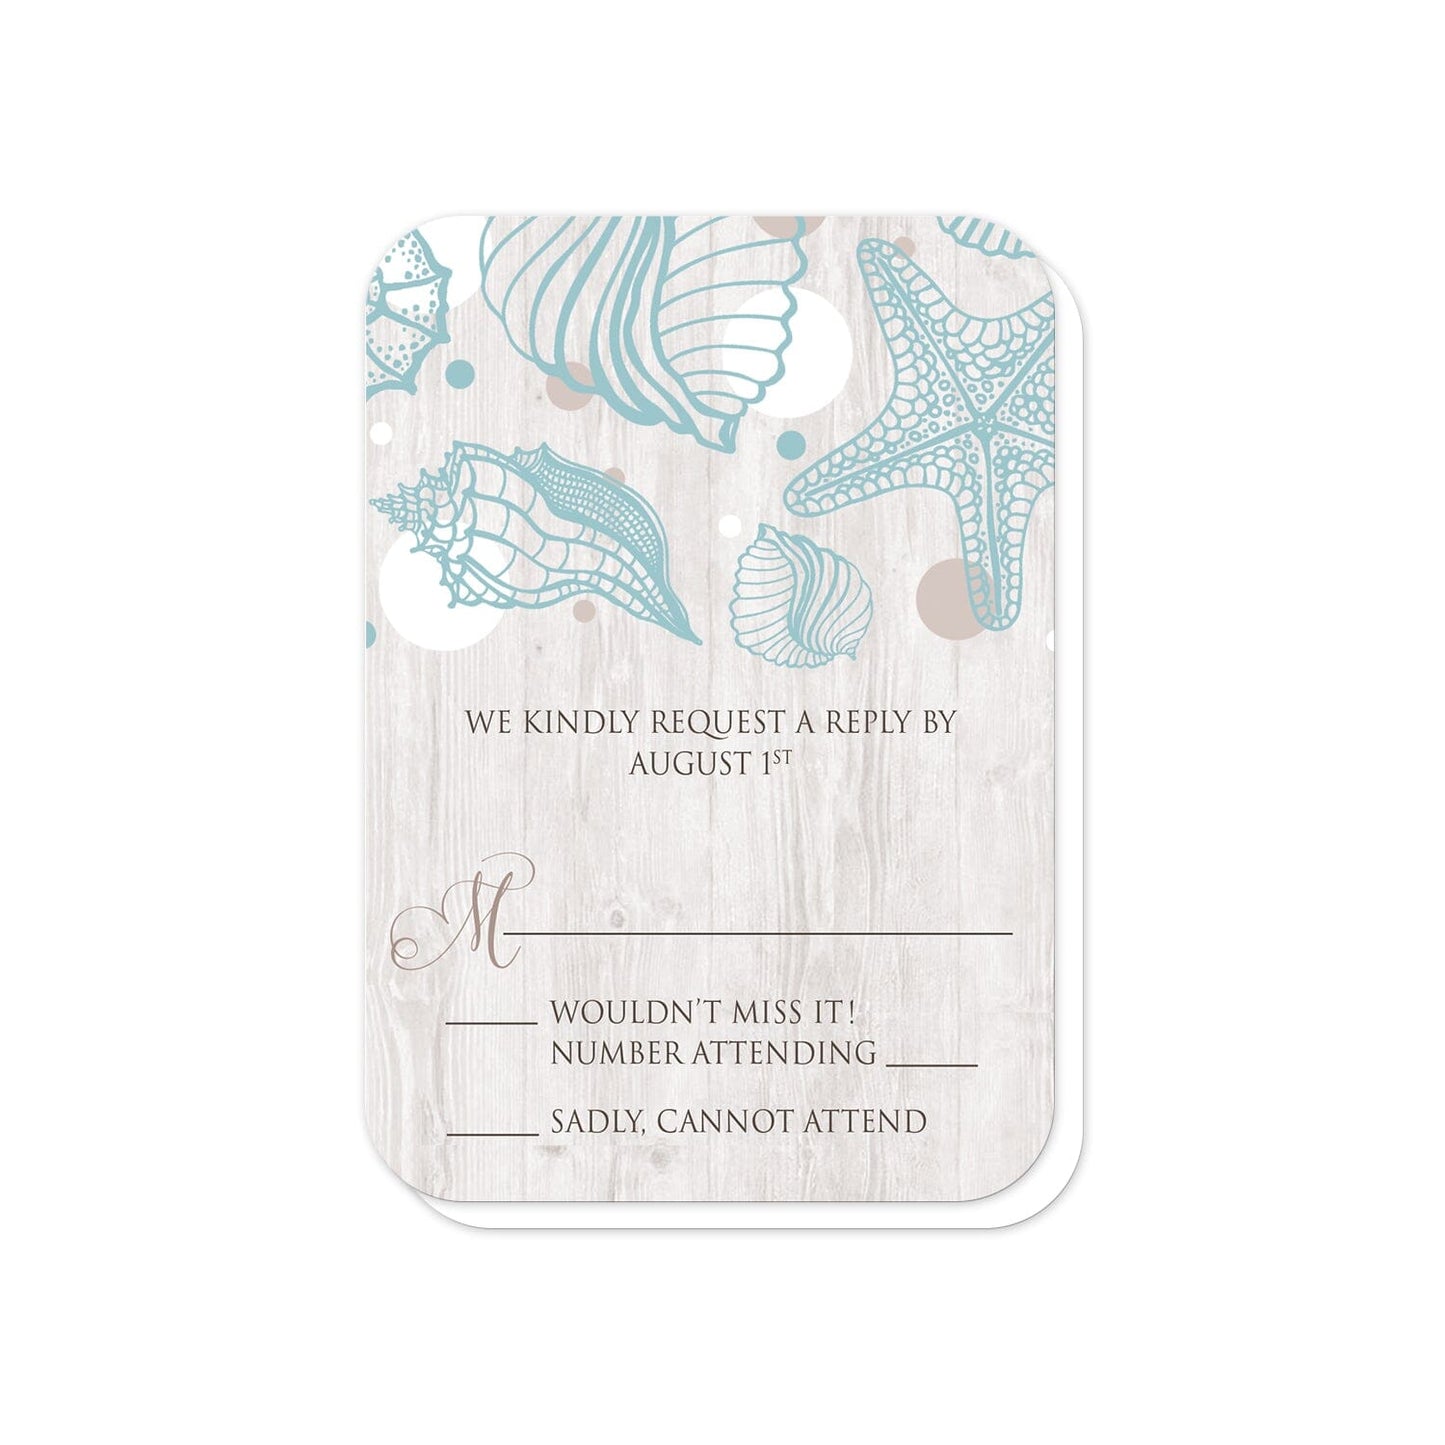 Seashell Whitewashed Wood Beach RSVP Cards (with rounded corners) at Artistically Invited.